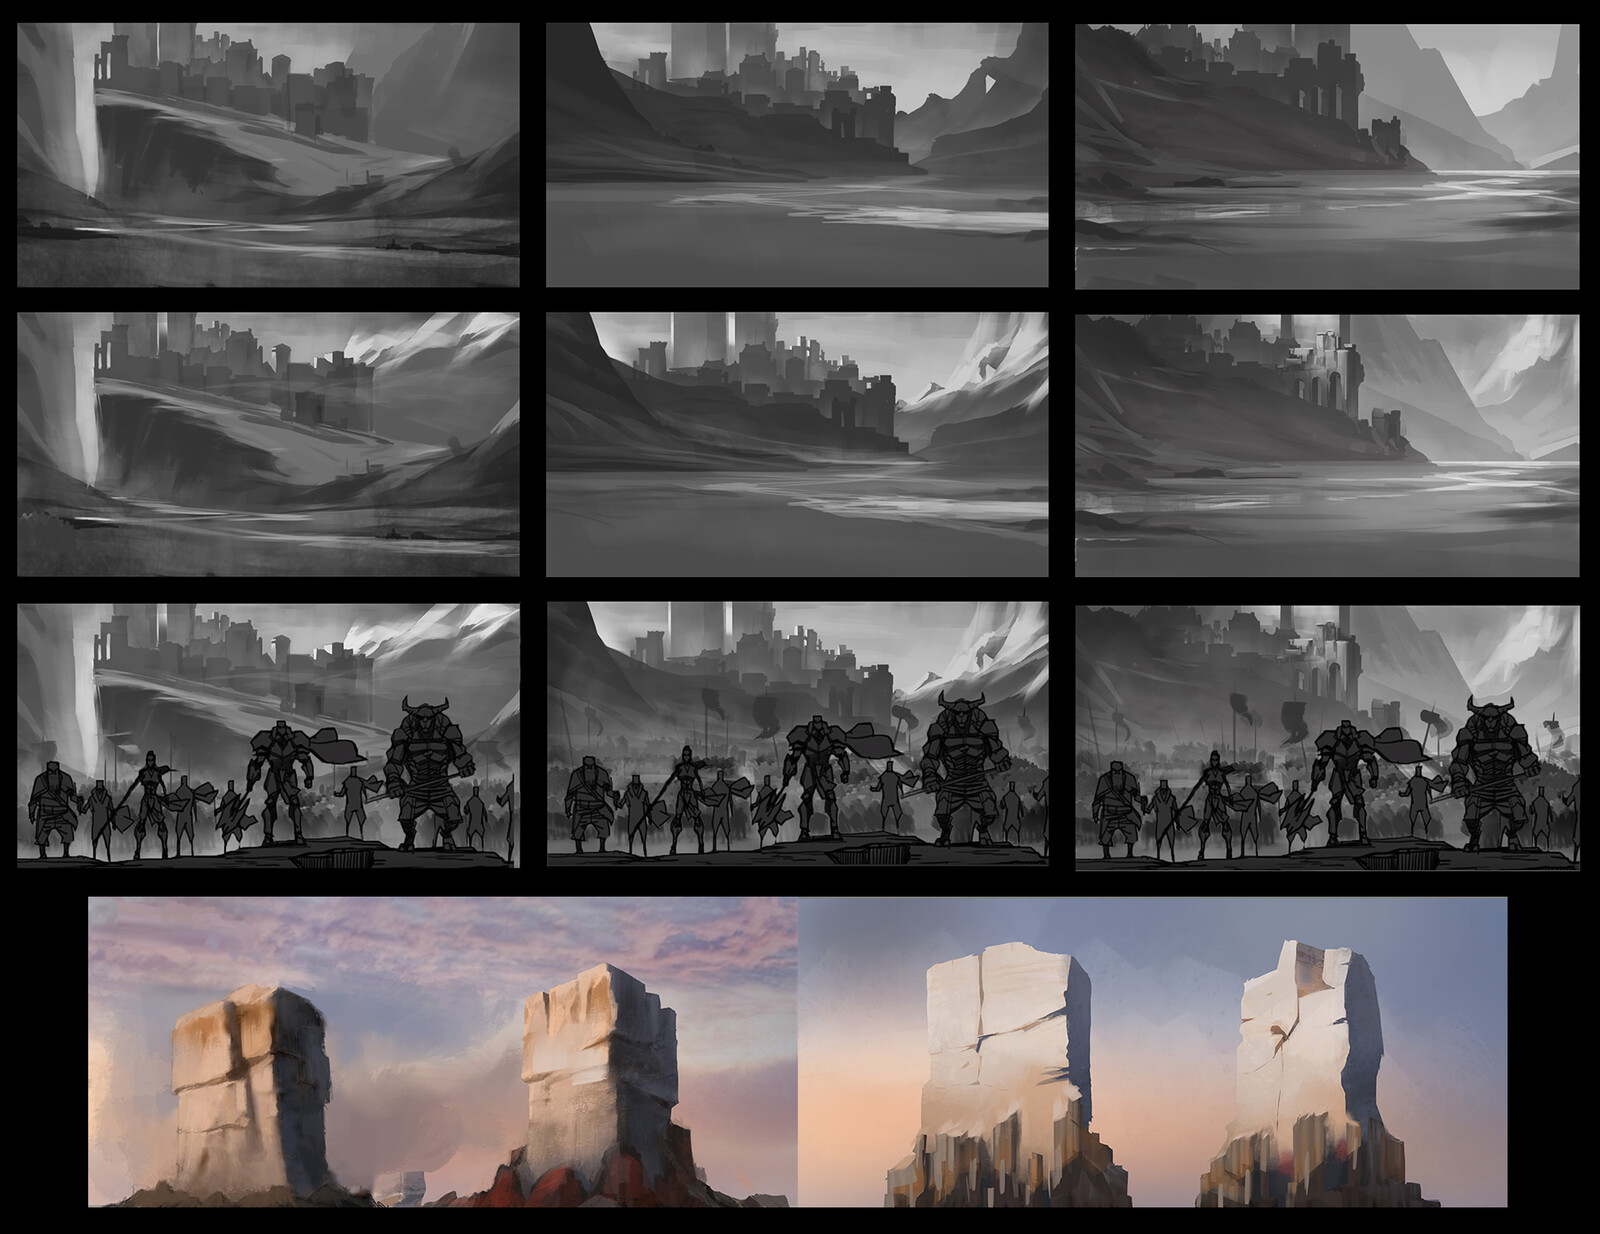 Concepts for final shot